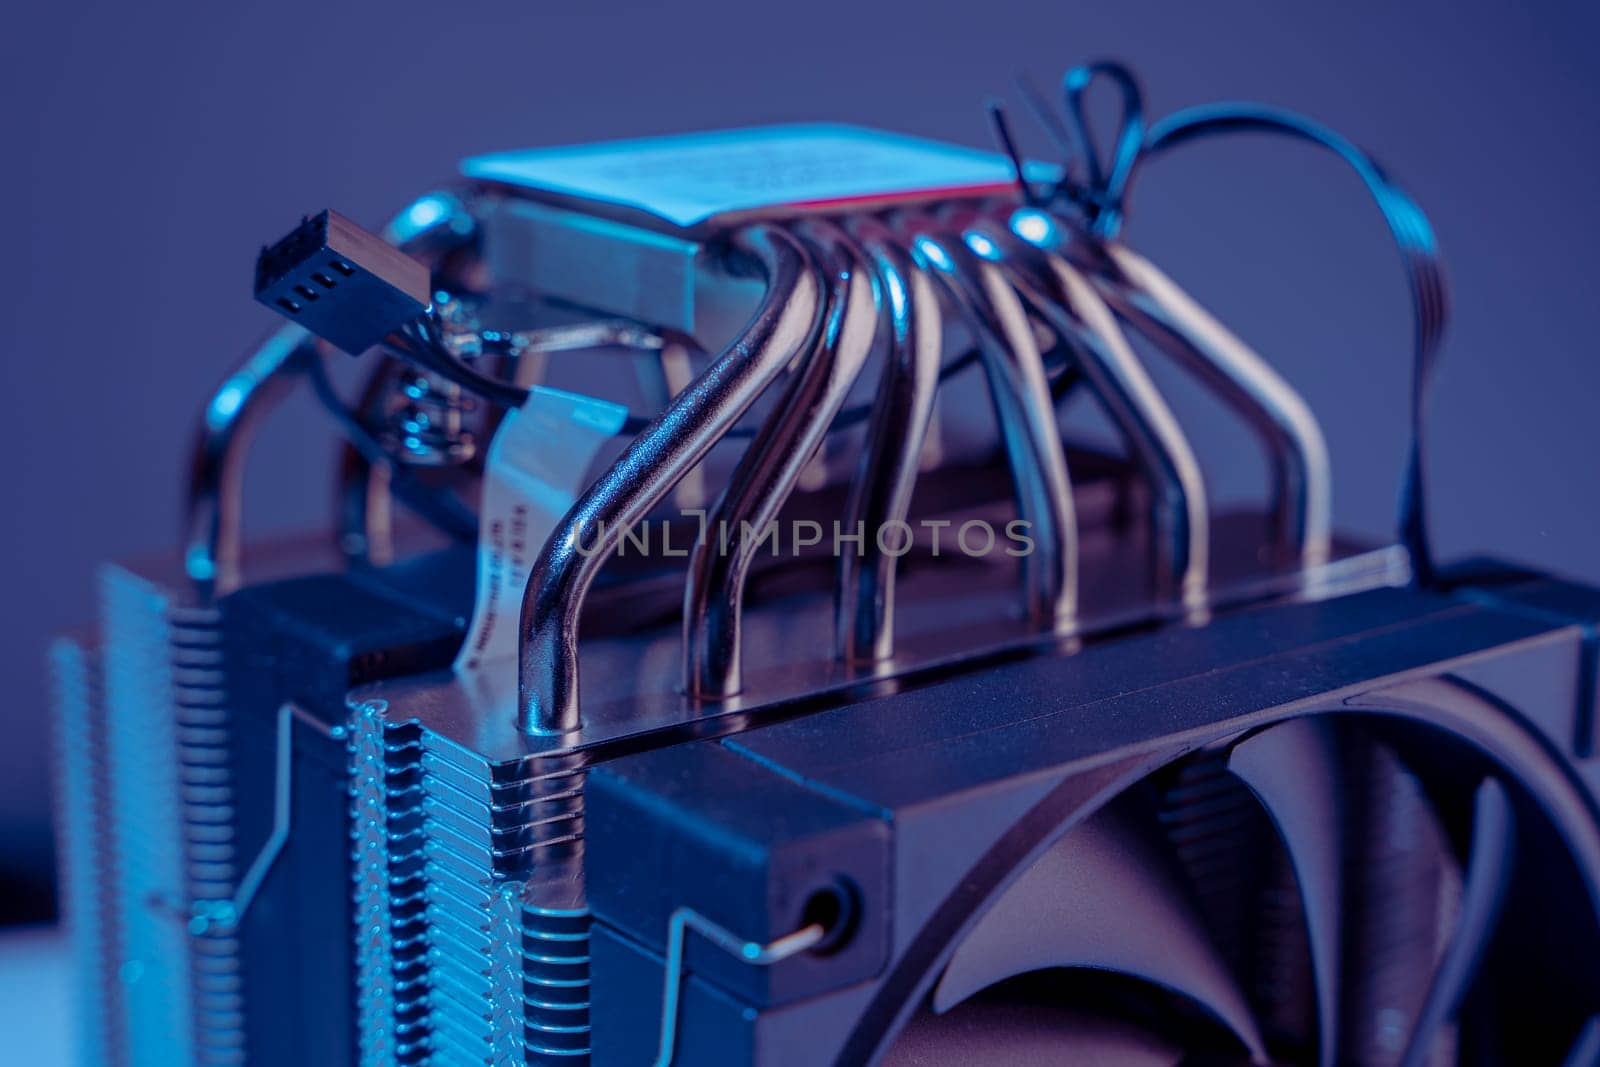 Computer fan. modern powerful cooler for cooling the CPU. Processor cooling system. concept of PC hardware. Air cooler of a personal computer processor close-up. Copy space